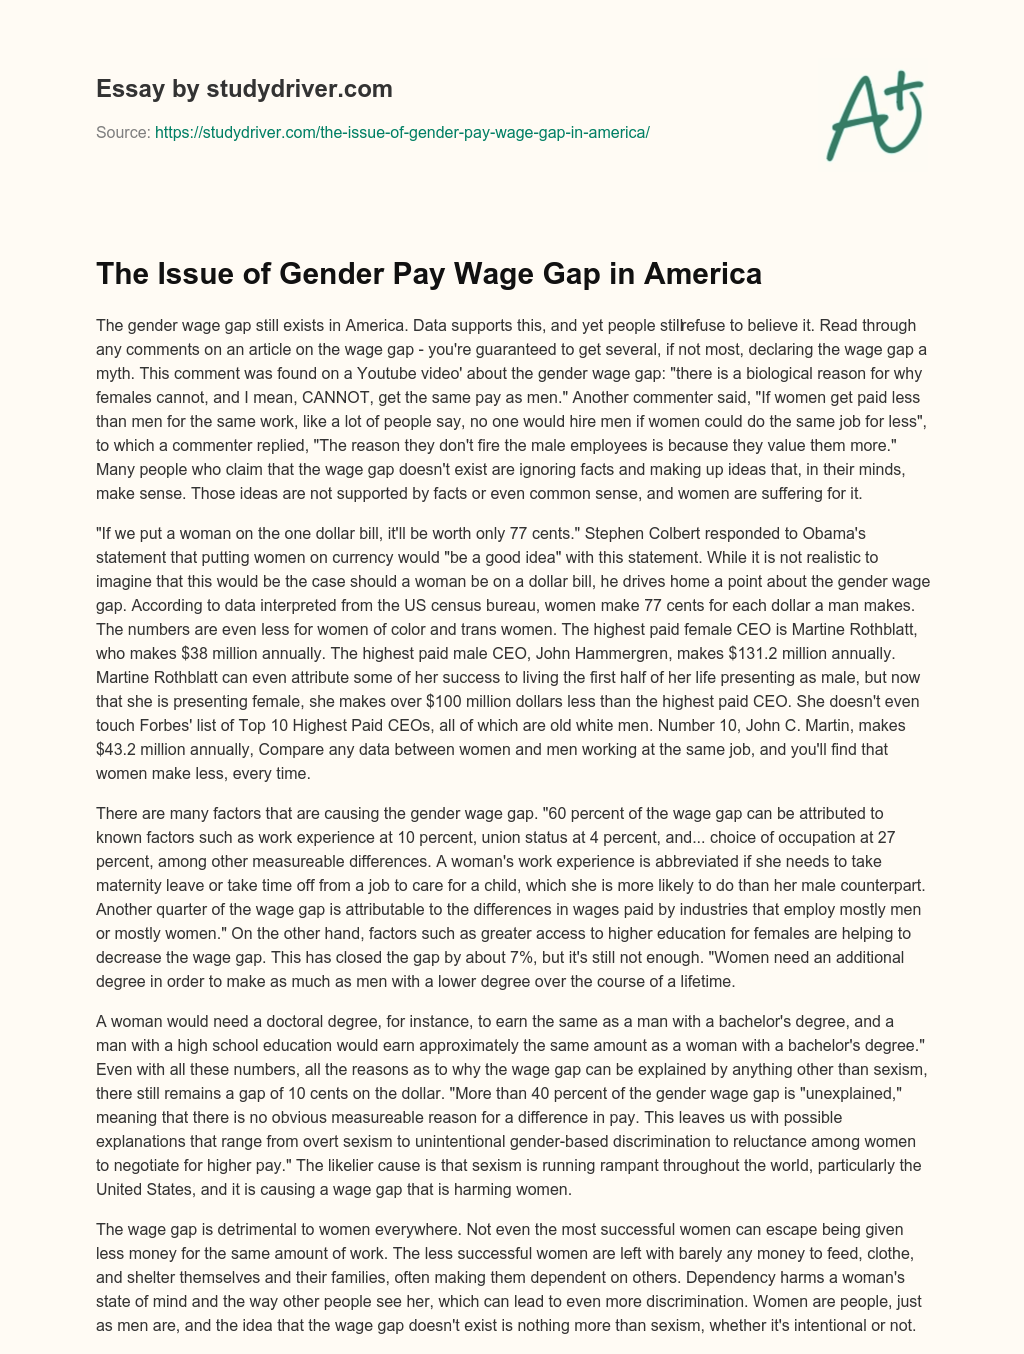 The Issue of Gender Pay Wage Gap in America essay